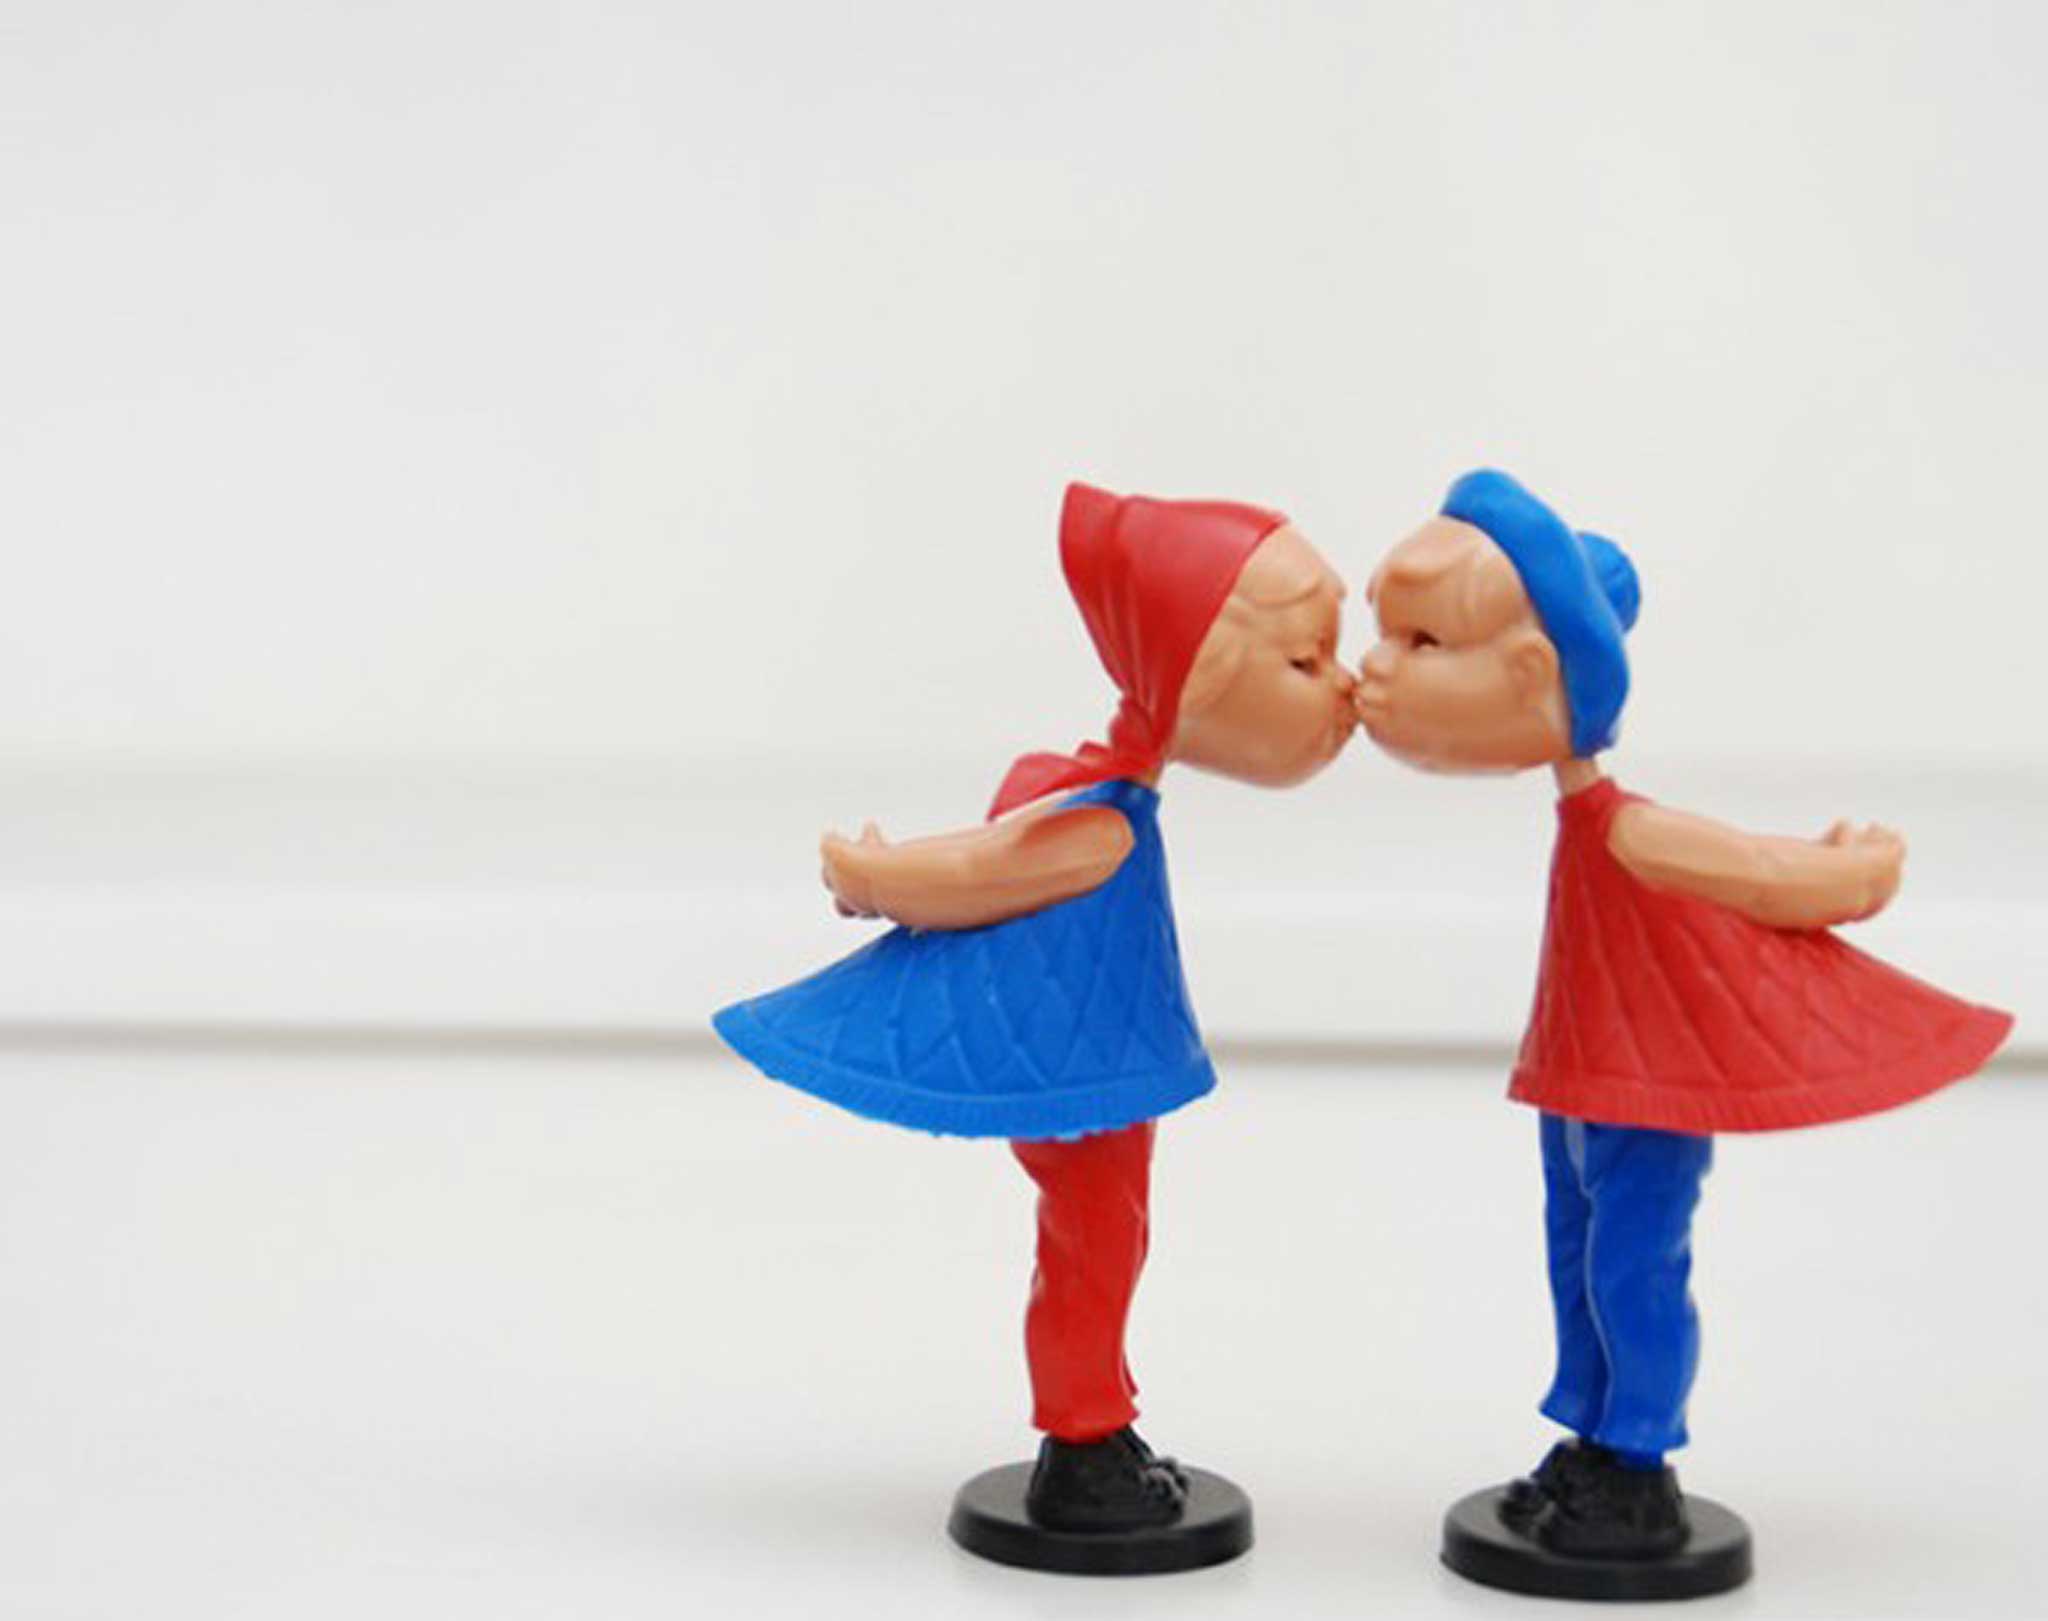 For romantics, helpyourshelf.co.uk has a magnetic kissing couple for £13